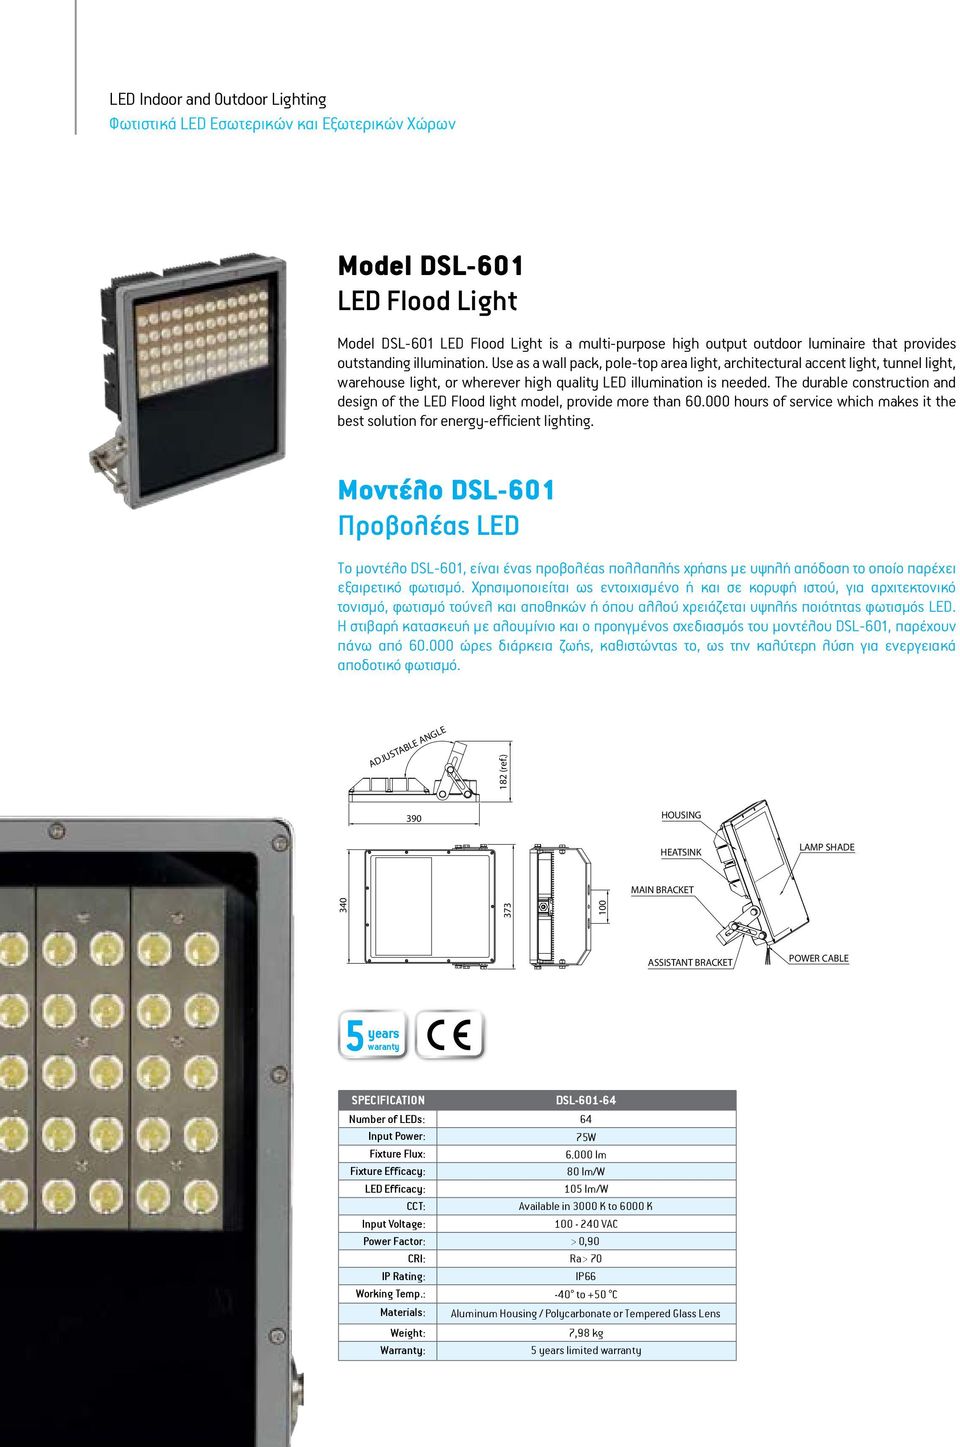 The durable construction and design of the LED Flood light model, provide more than 60.000 hours of service which makes it the best solution for energy-efficient lighting.